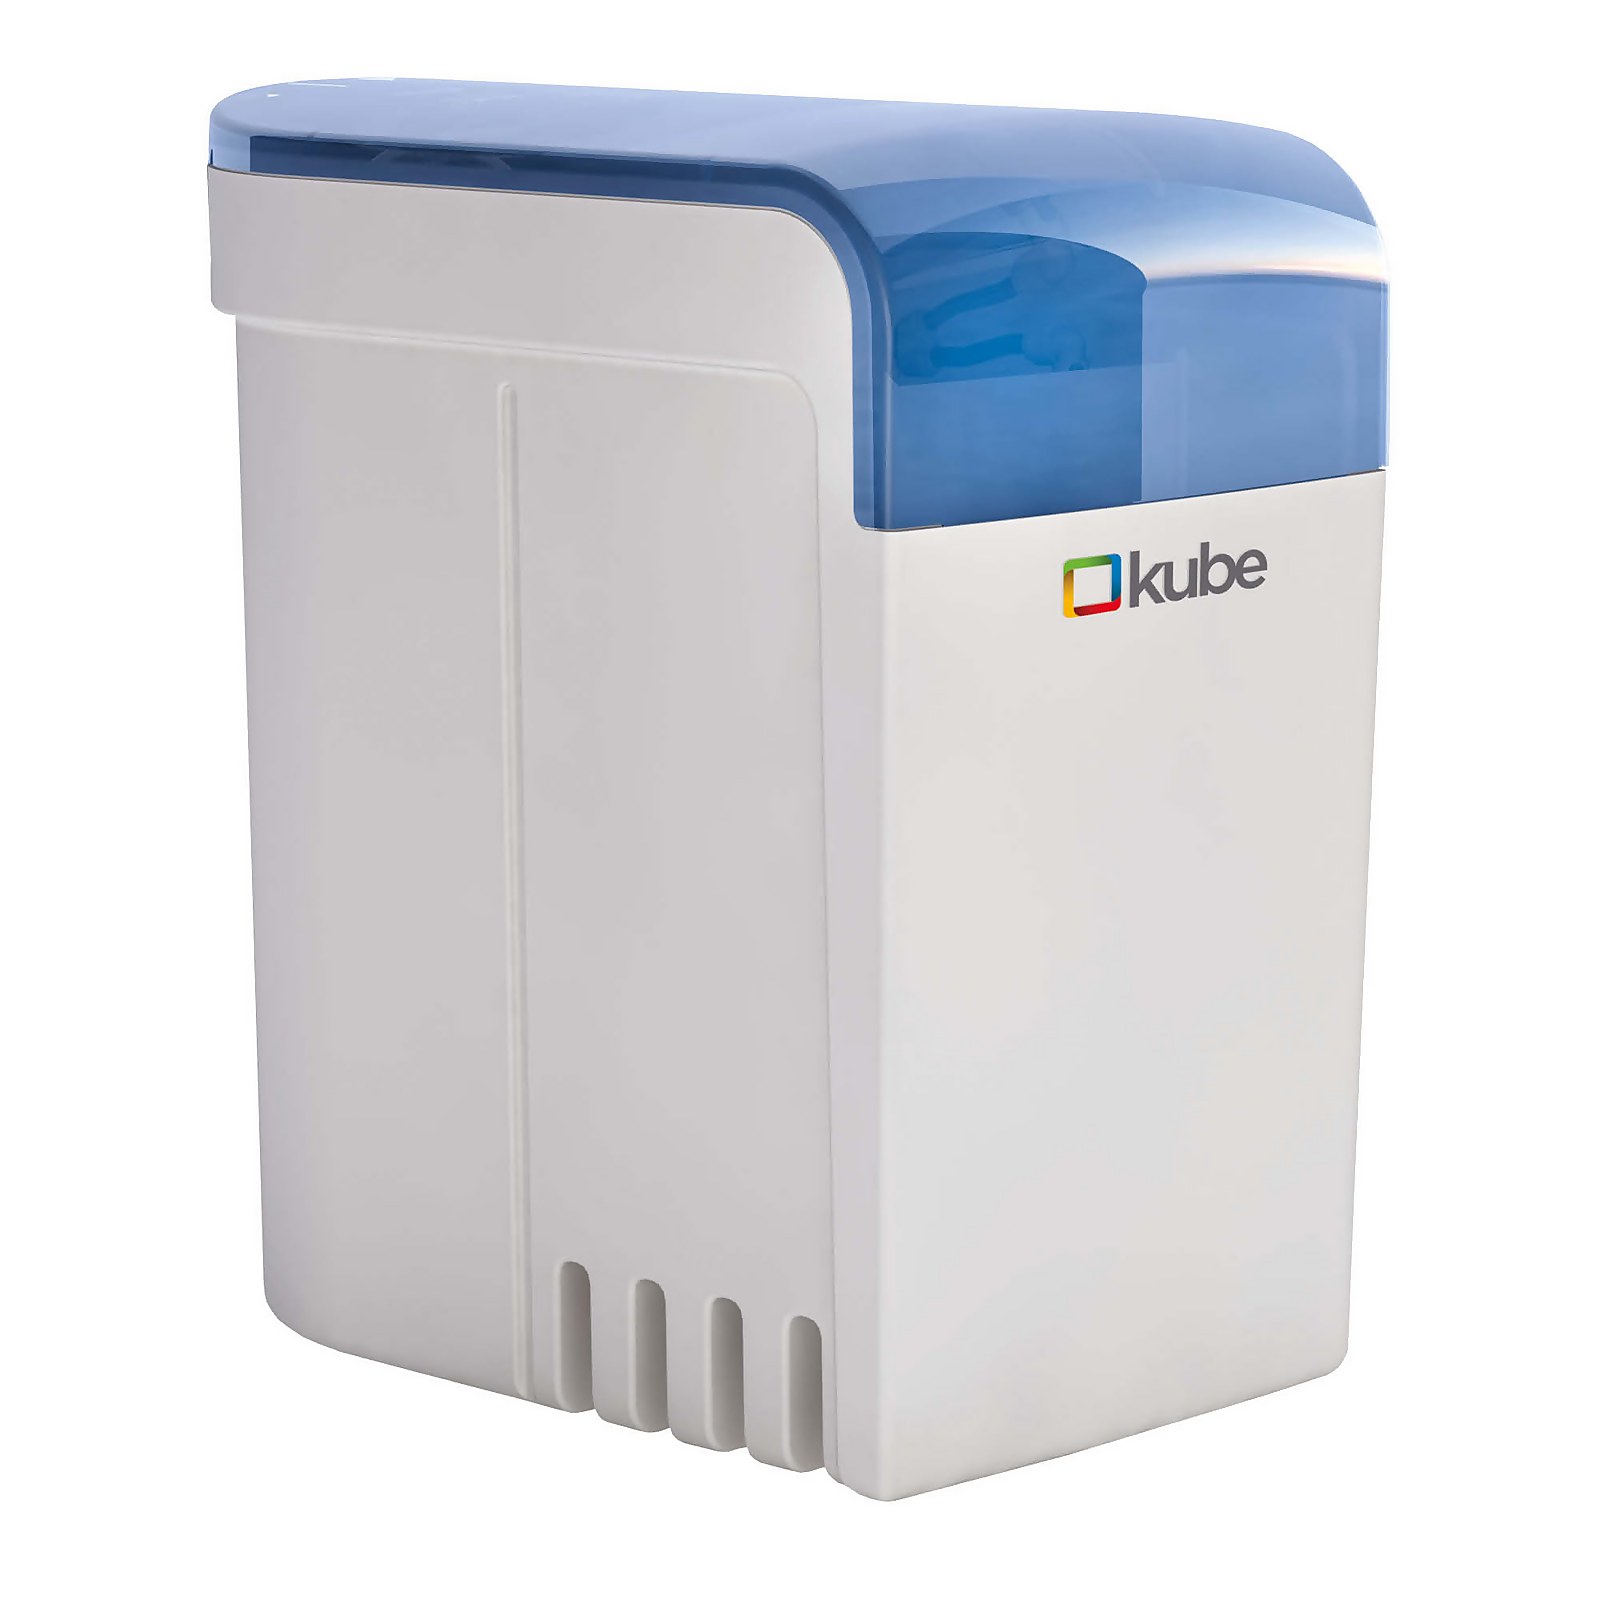 Kube II Non-Electric Water Softener - For Households with up to 4 Bathrooms